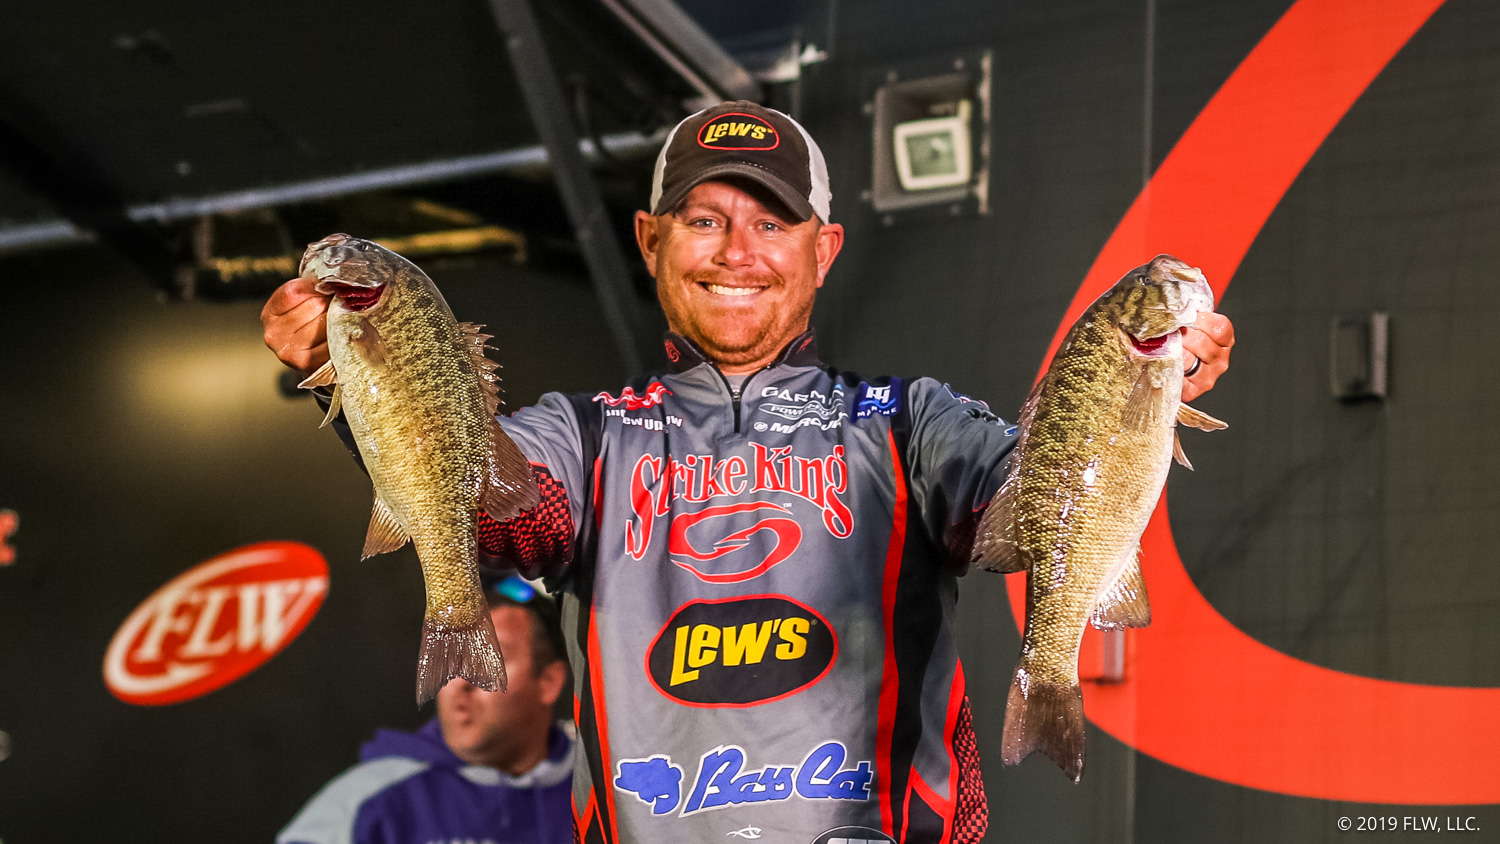 Upshaw Leads at Day Two of Costa FLW Series Championship on Lake Cumberland  - Major League Fishing